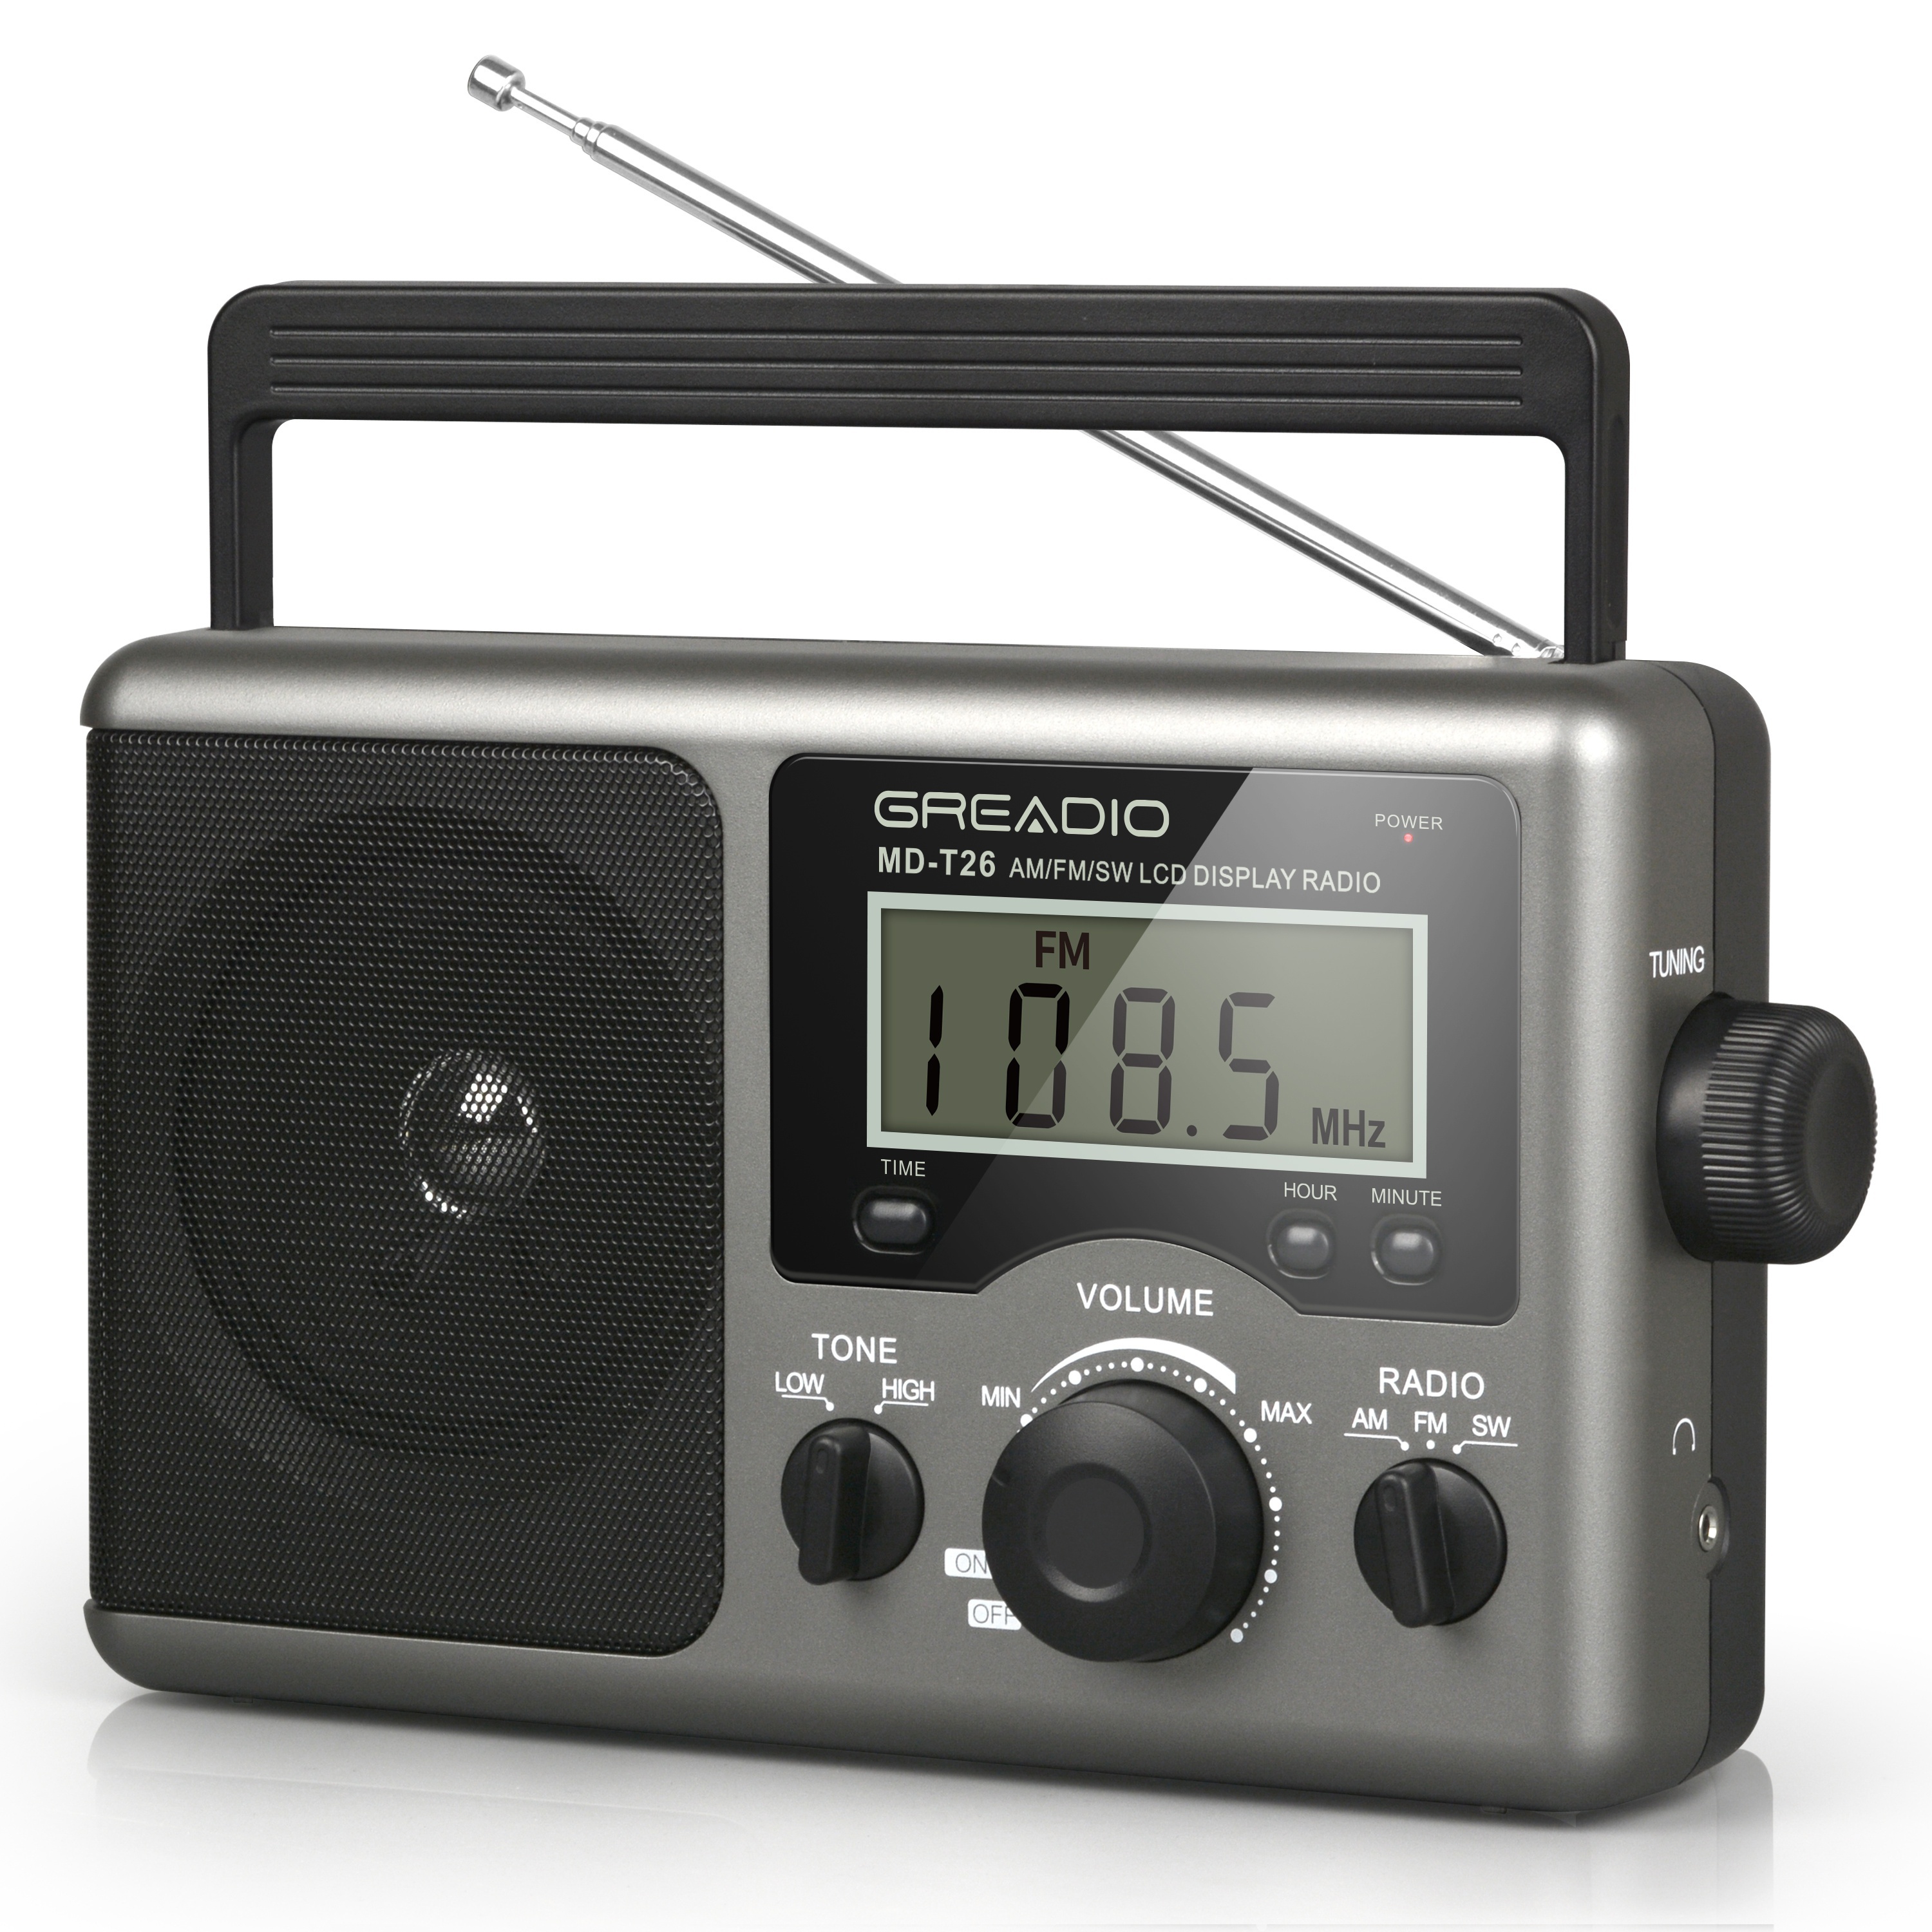 

Greadio Portable Am/fm/sw Transistor Radio With Best Reception, Lcd Display, Time Adjustment, 4d Battery Powered Ac Power, Large Speaker, Headphone Jack As A Gift